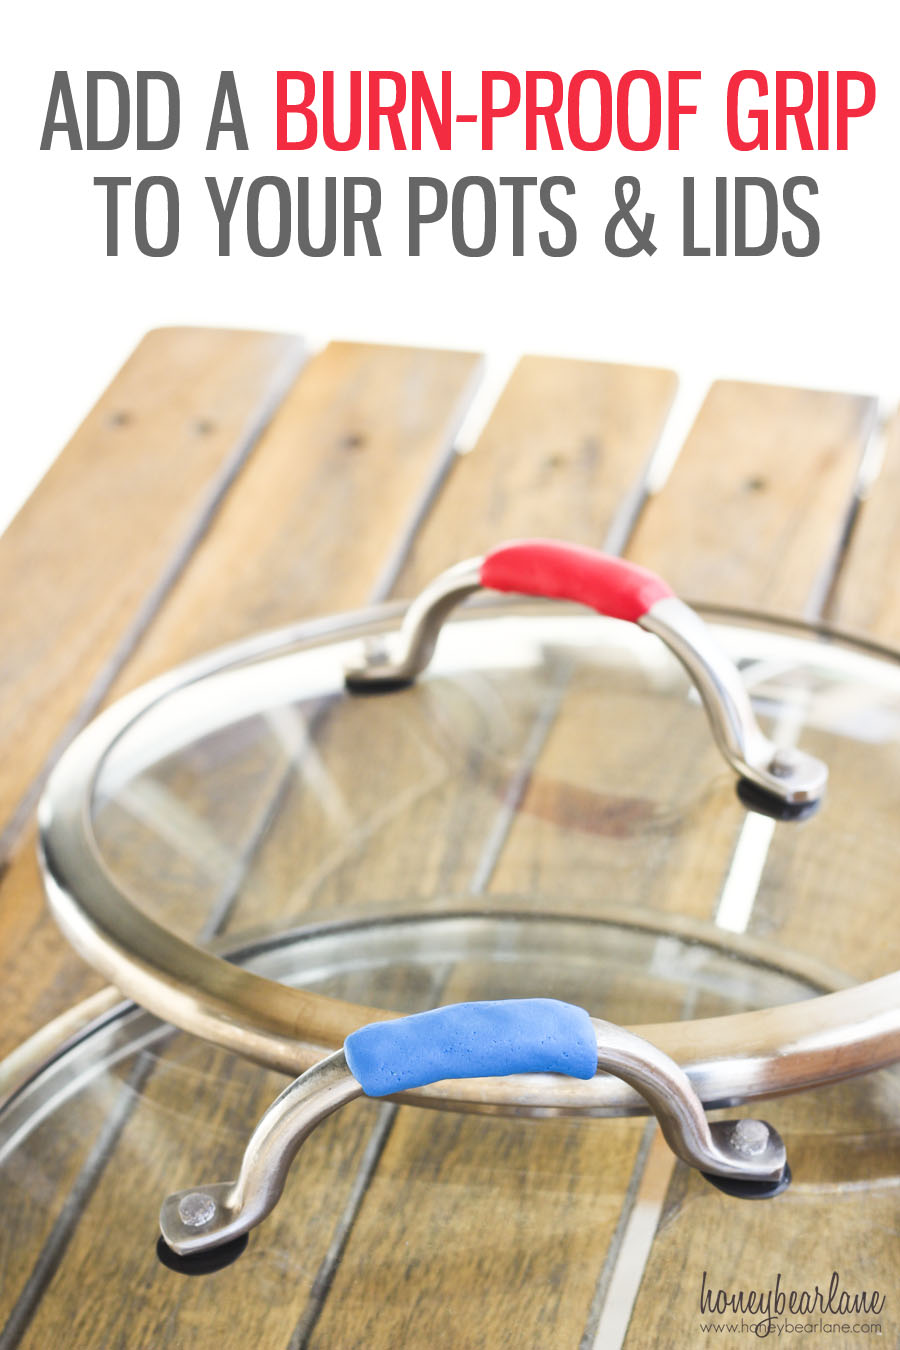 How to make heatproof grips for your pots and pans